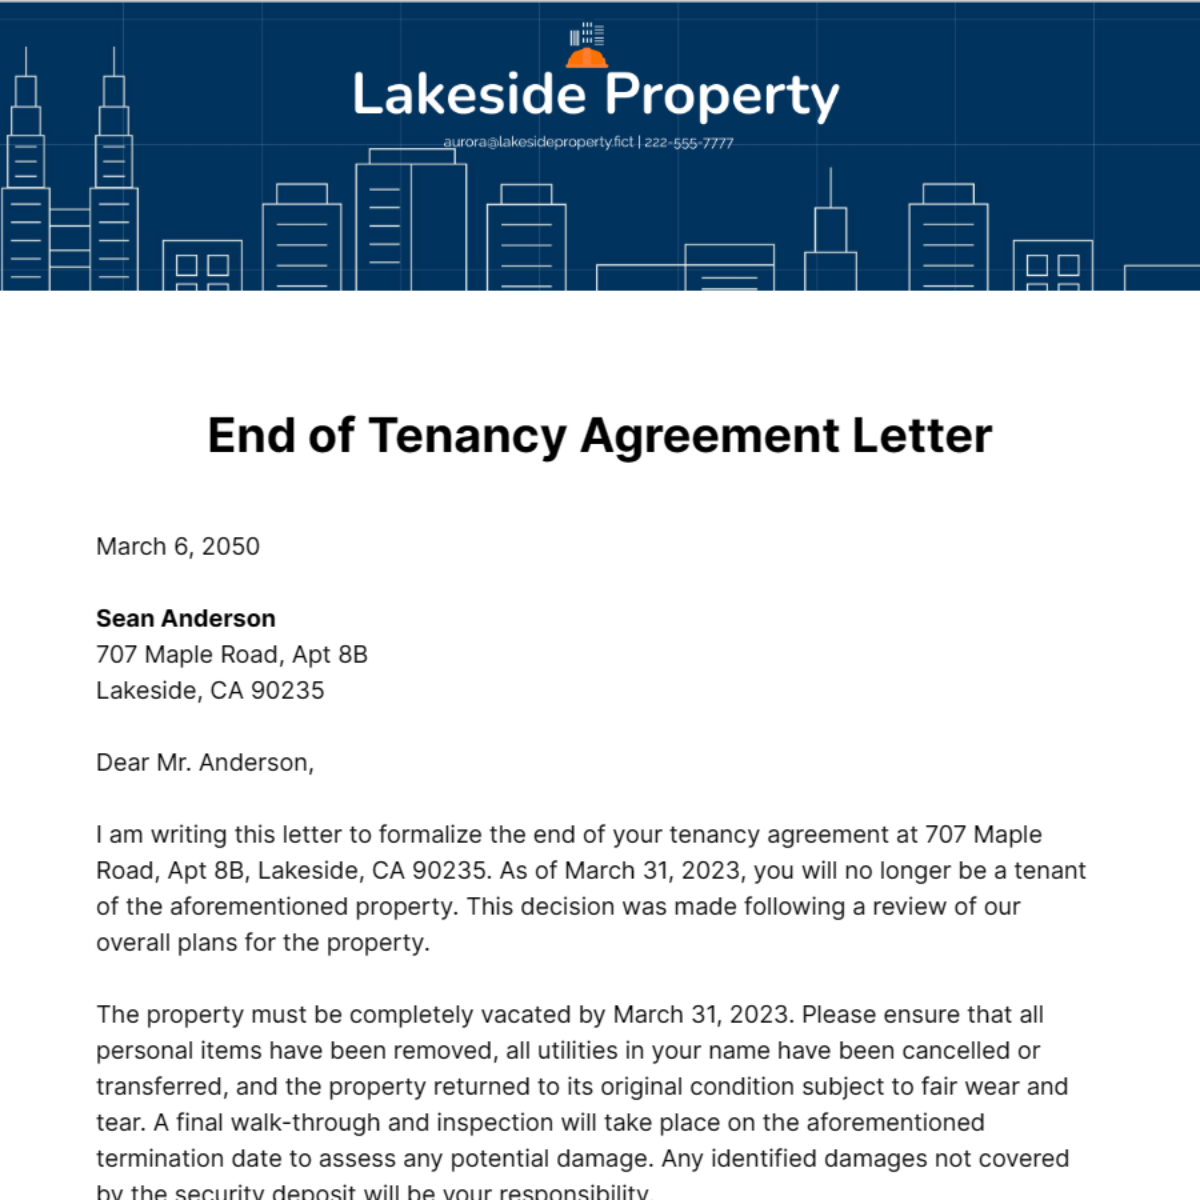 End of Tenancy Agreement Letter Template